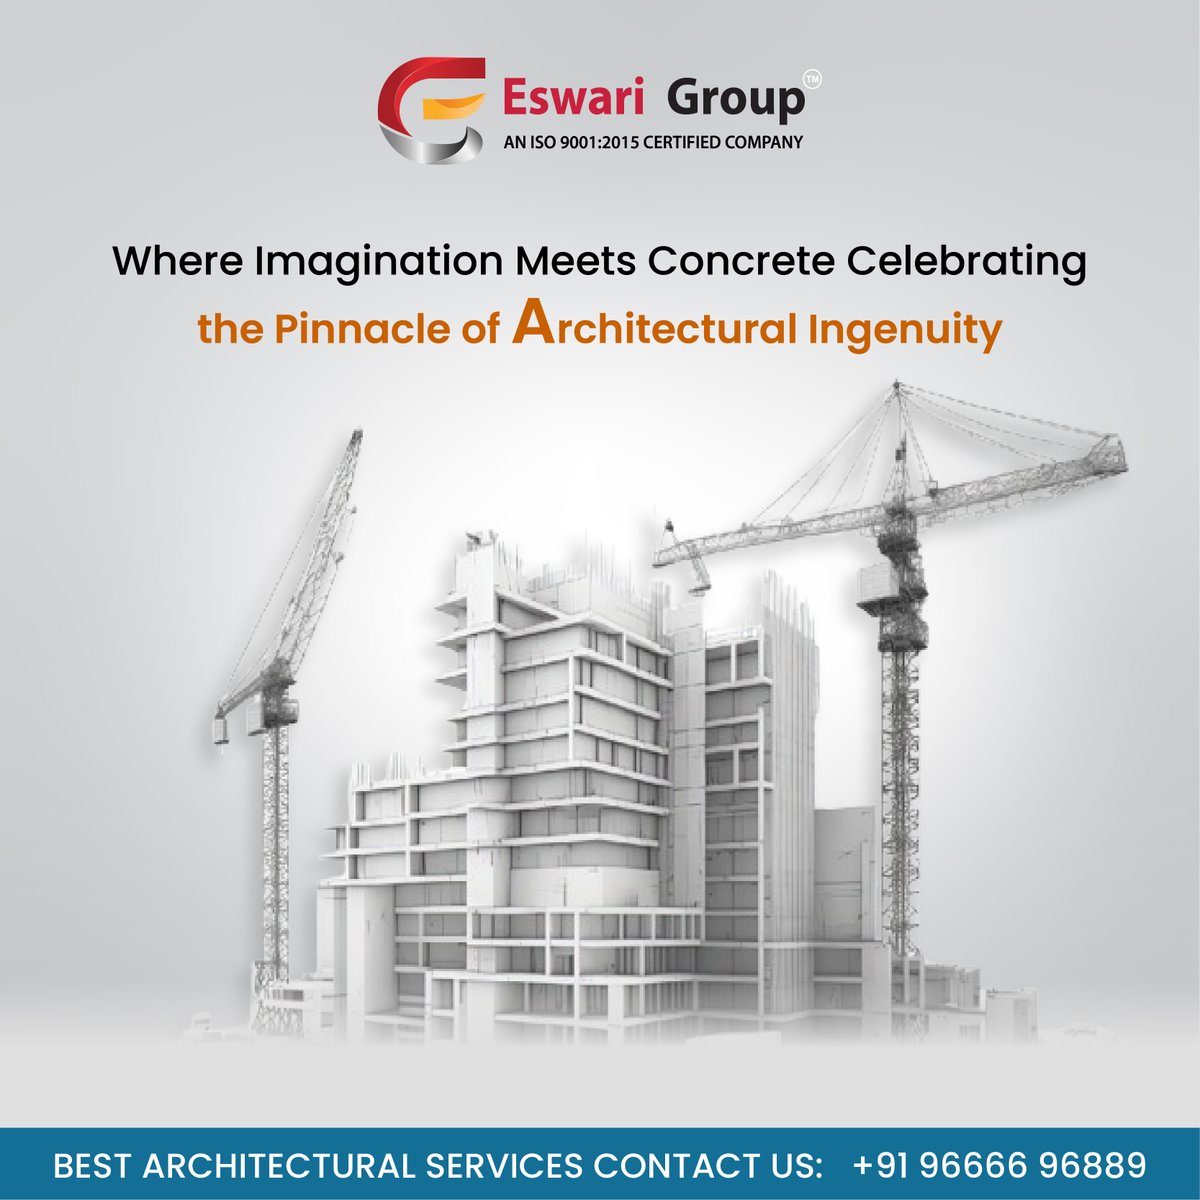 Crafting architectural marvels that inspire. From innovative designs to sustainable solutions, we redefine spaces. Join us in shaping the future of architecture.
Phone: 9666696889
Website:eswarigroup.com
#Architecture #Design #Innovation #Sustainability #EswariGroup